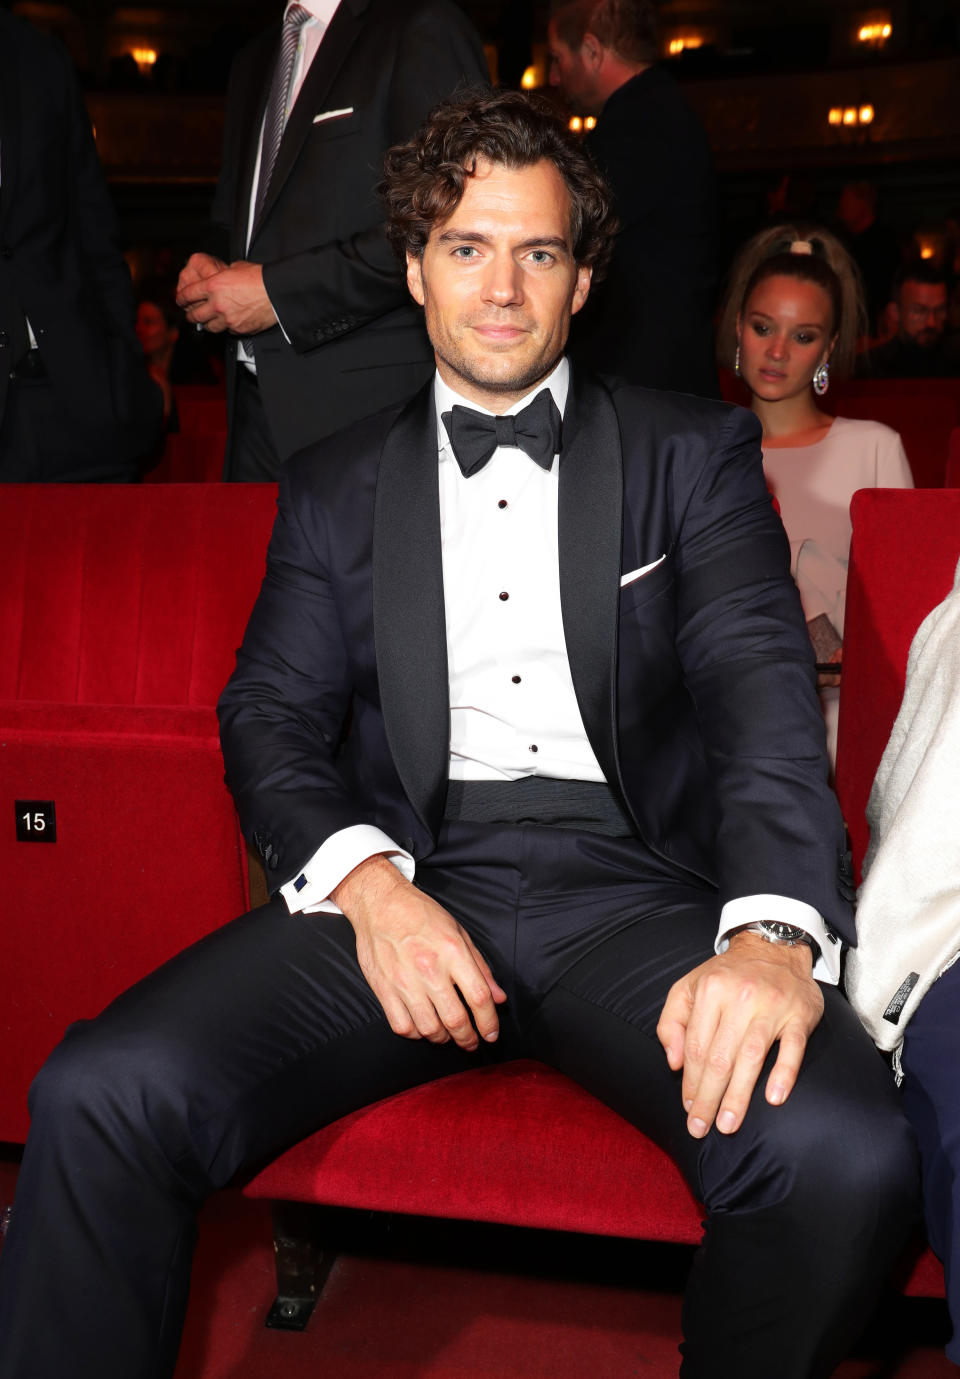 Cavill at the GQ Men of the Year Awards in 2018